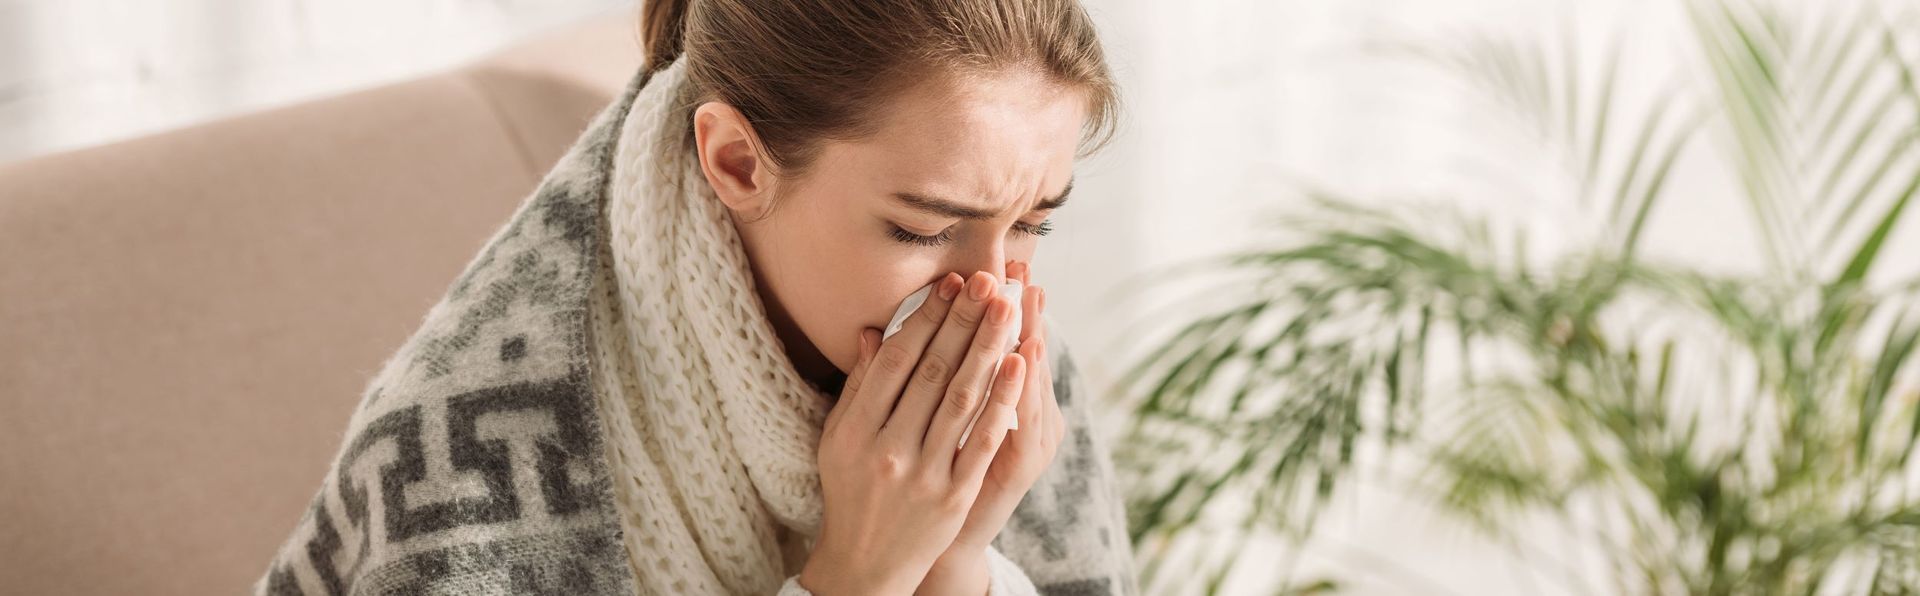 Senior man suffering from cold or allergy blows nose snot into a  napkin at home